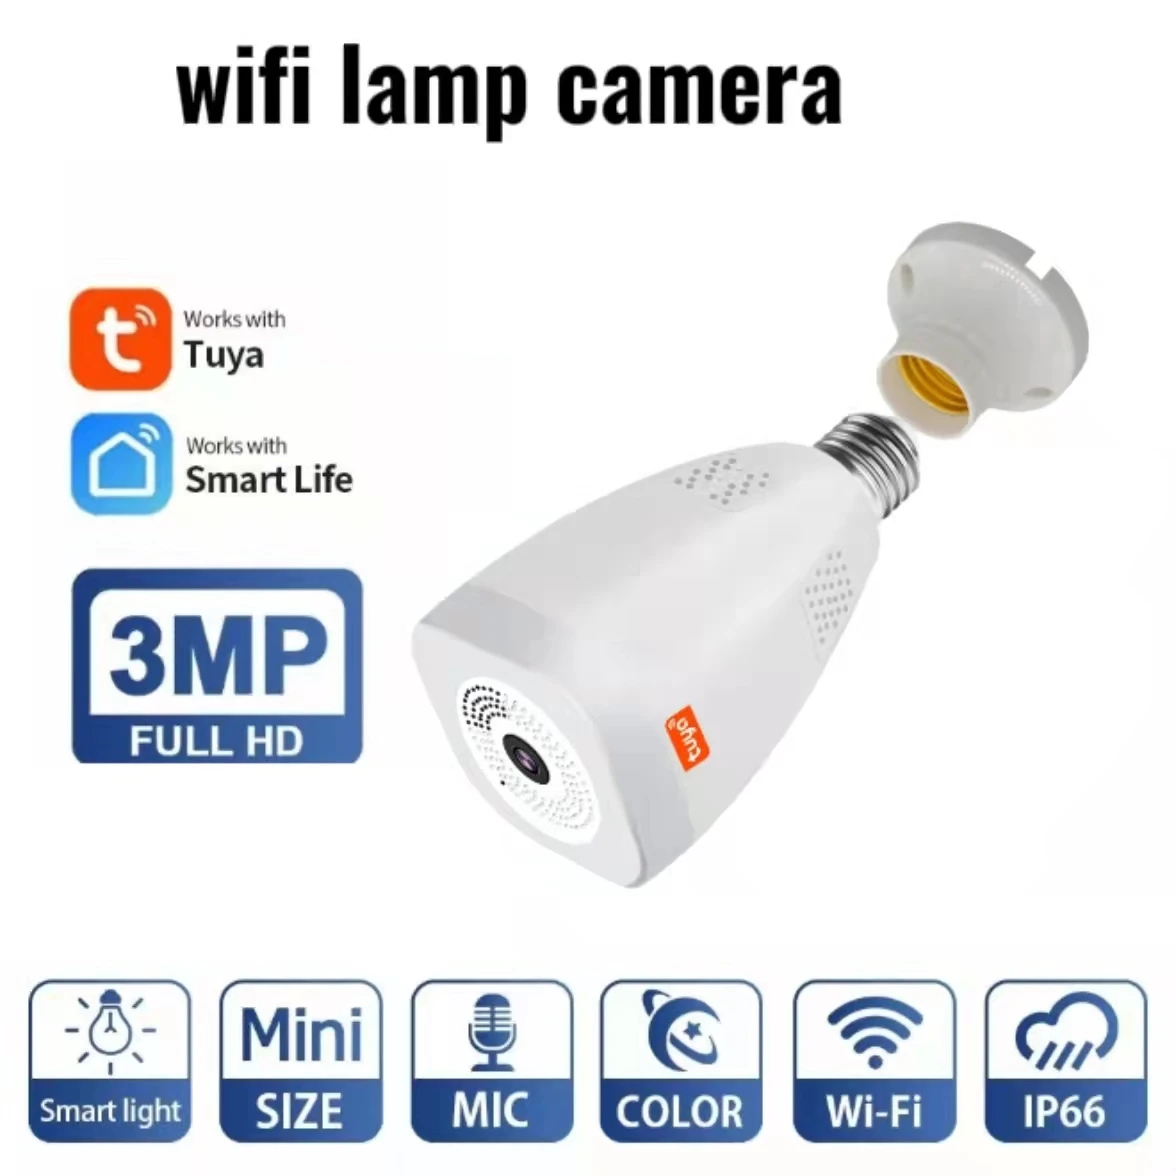 melodie afstuderen Bergbeklimmer Professional 3mp Hd Resolution Action Bulb Lamp Camera Home Baby Monitoring  Camcorder Cctv Network Security Mini Camera - Buy 360 Panoramic Fisheye  Light Kamera Indoors Video Cameras De Seguridad Mini Camera With